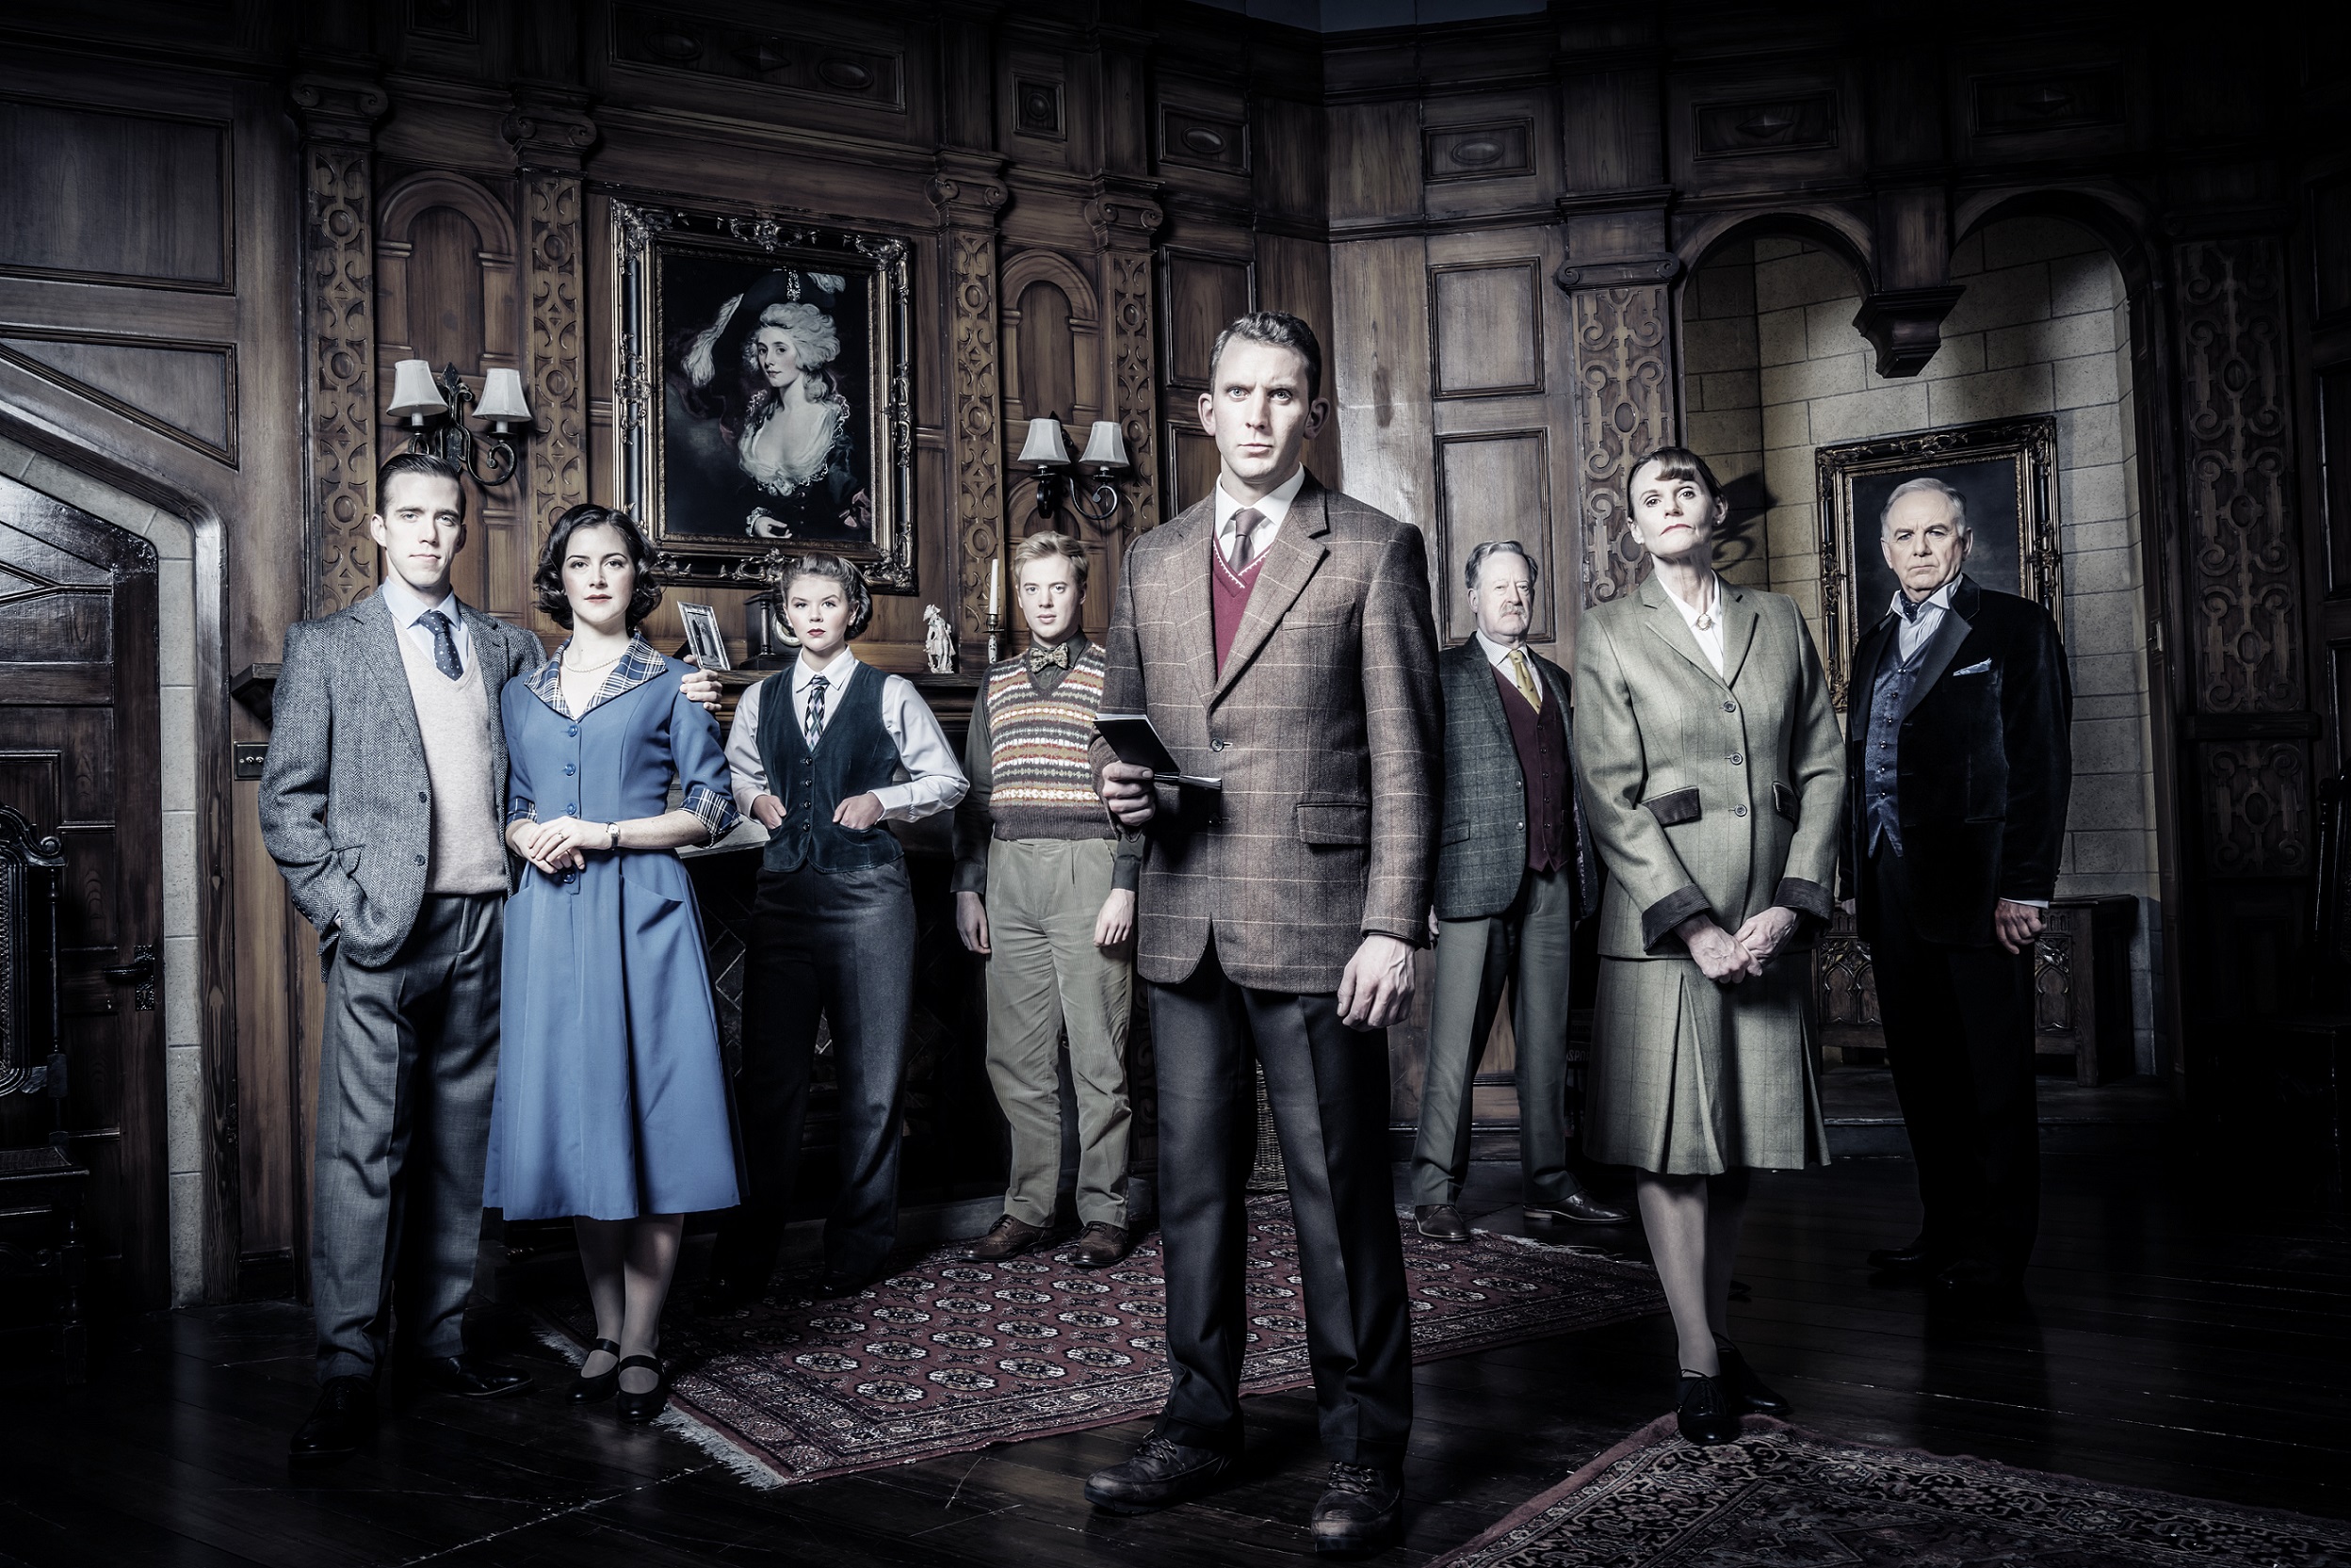 The cast of The Mousetrap